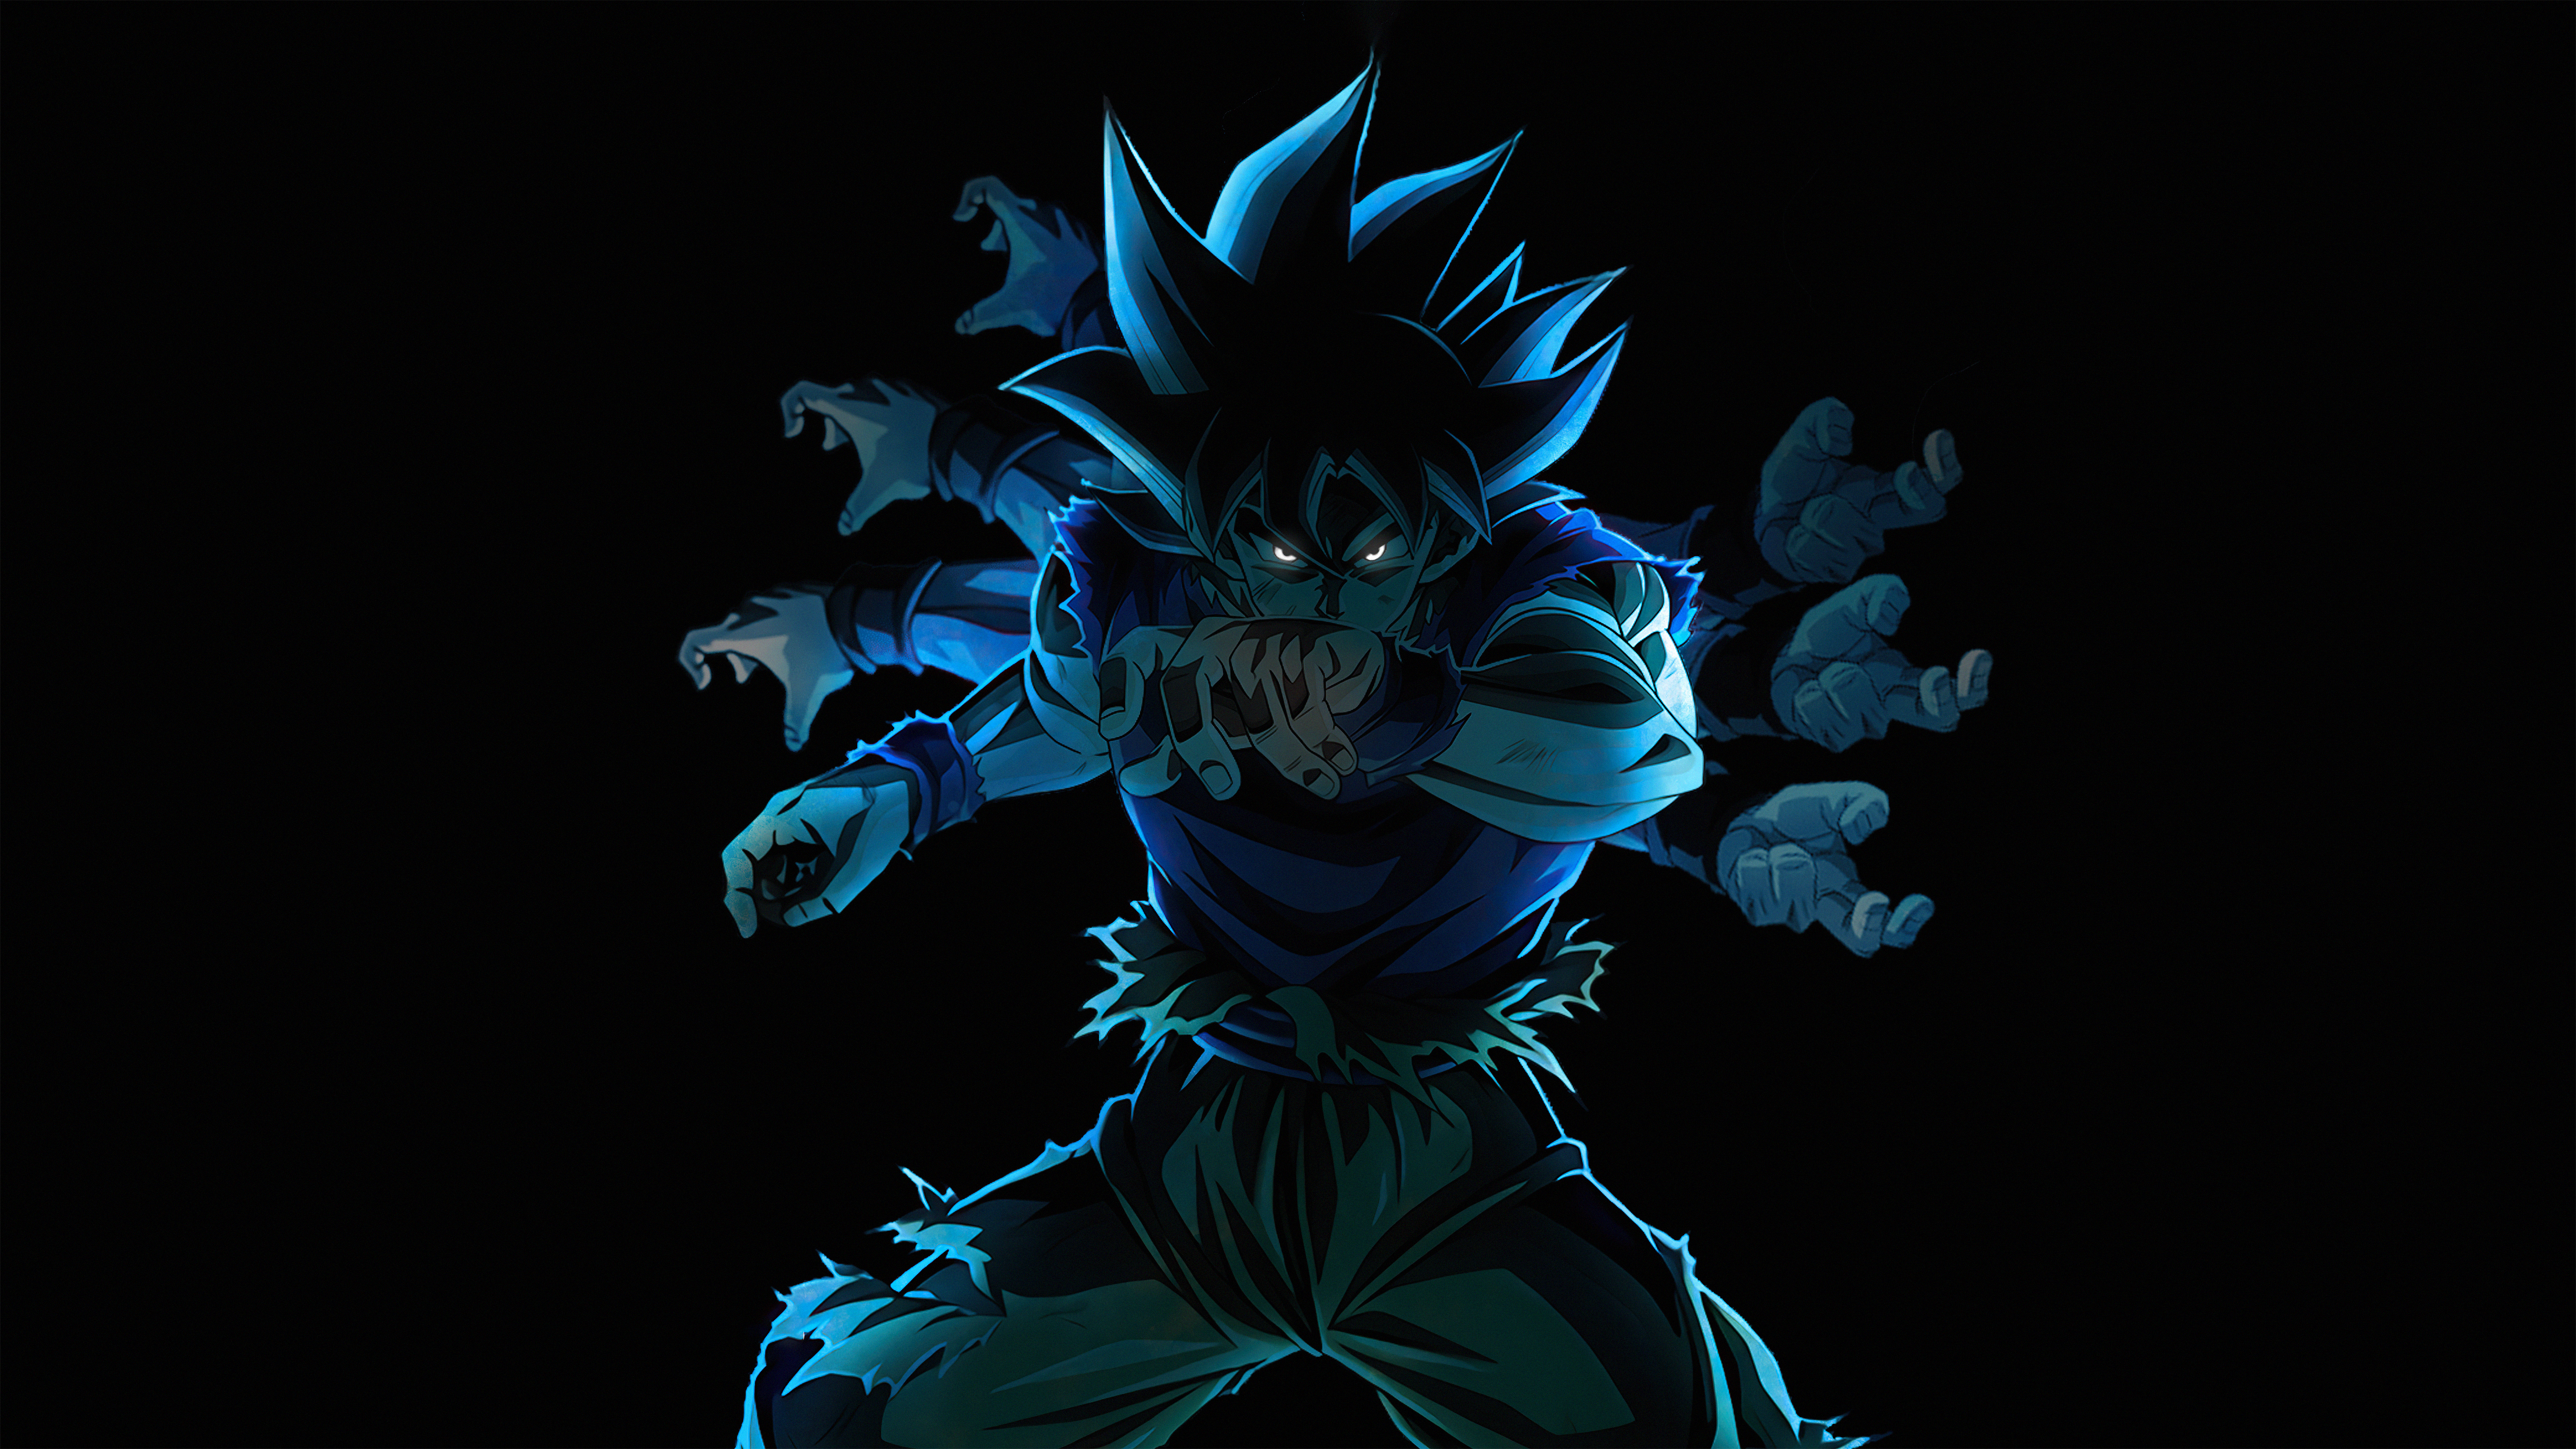 X goku dragon ball super ultra instinct x resolution hd k wallpapers images backgrounds photos and pictures